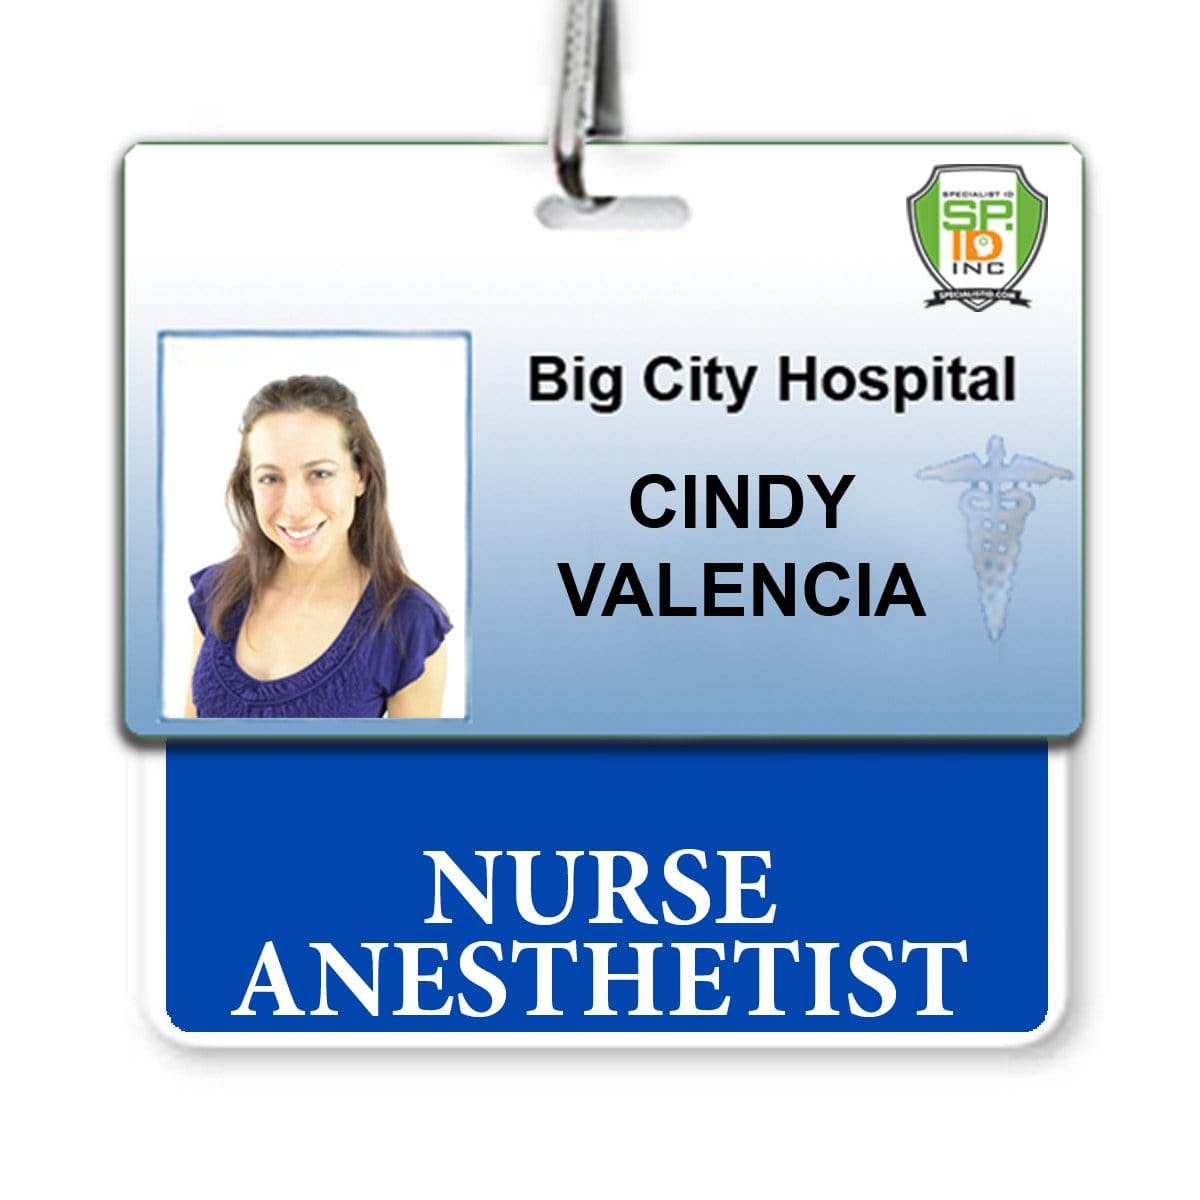 Identification badge for Cindy Valencia at Big City Hospital, titled Nurse Anesthetist. The badge includes a photo of Cindy, hospital logo, caduceus symbol, and serves as her Nurse Anesthetist Horizontal Badge Buddy with Blue Border in the hospital setting.